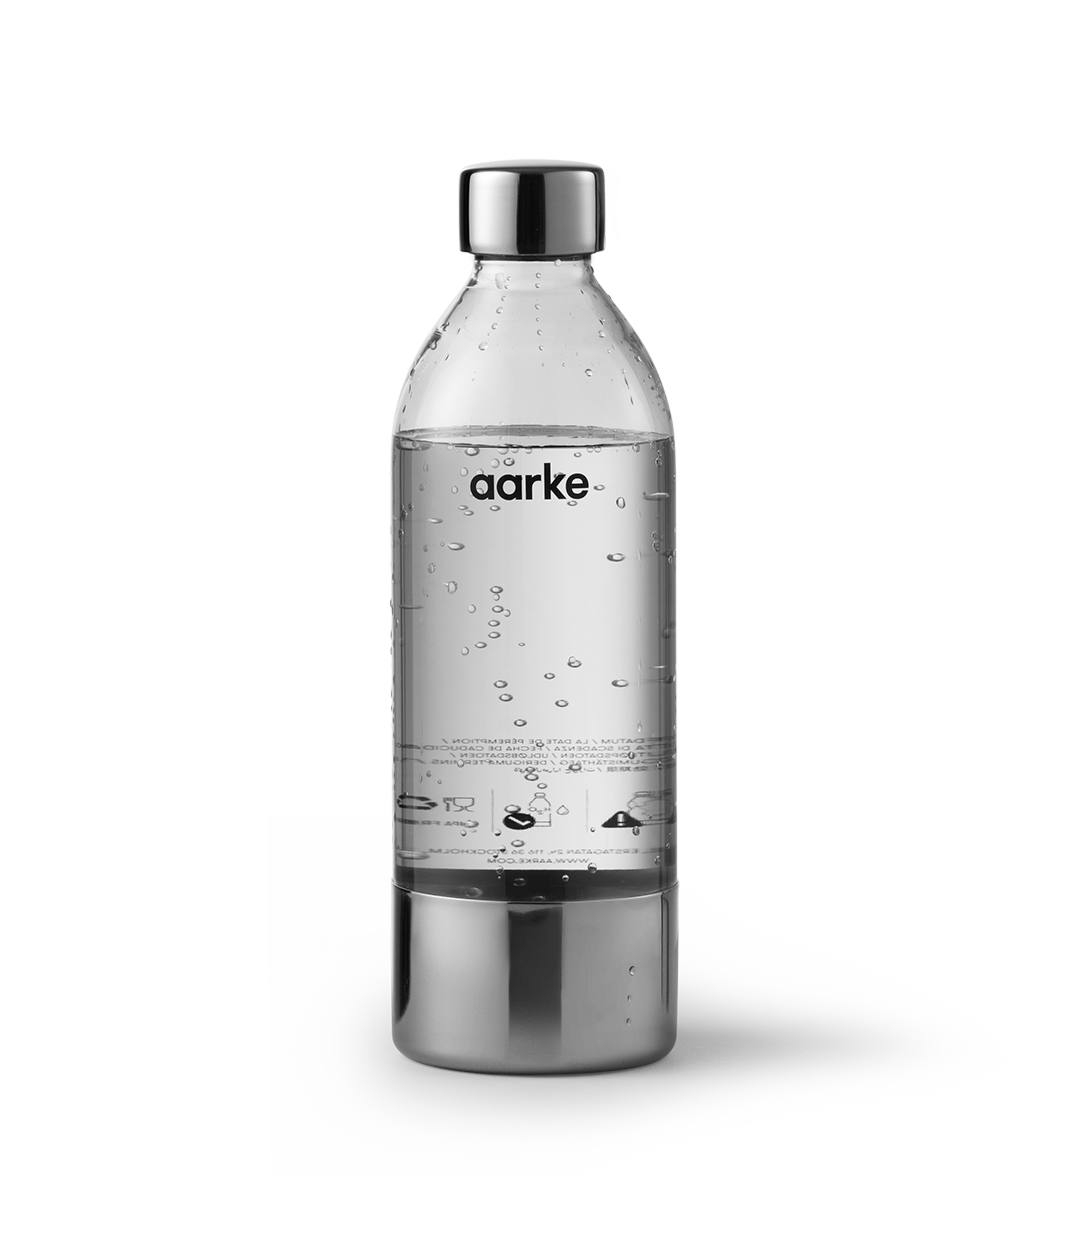 Aarke Carbonator Pro Extra Water Bottles, Glass, 27-Ounce, Set of